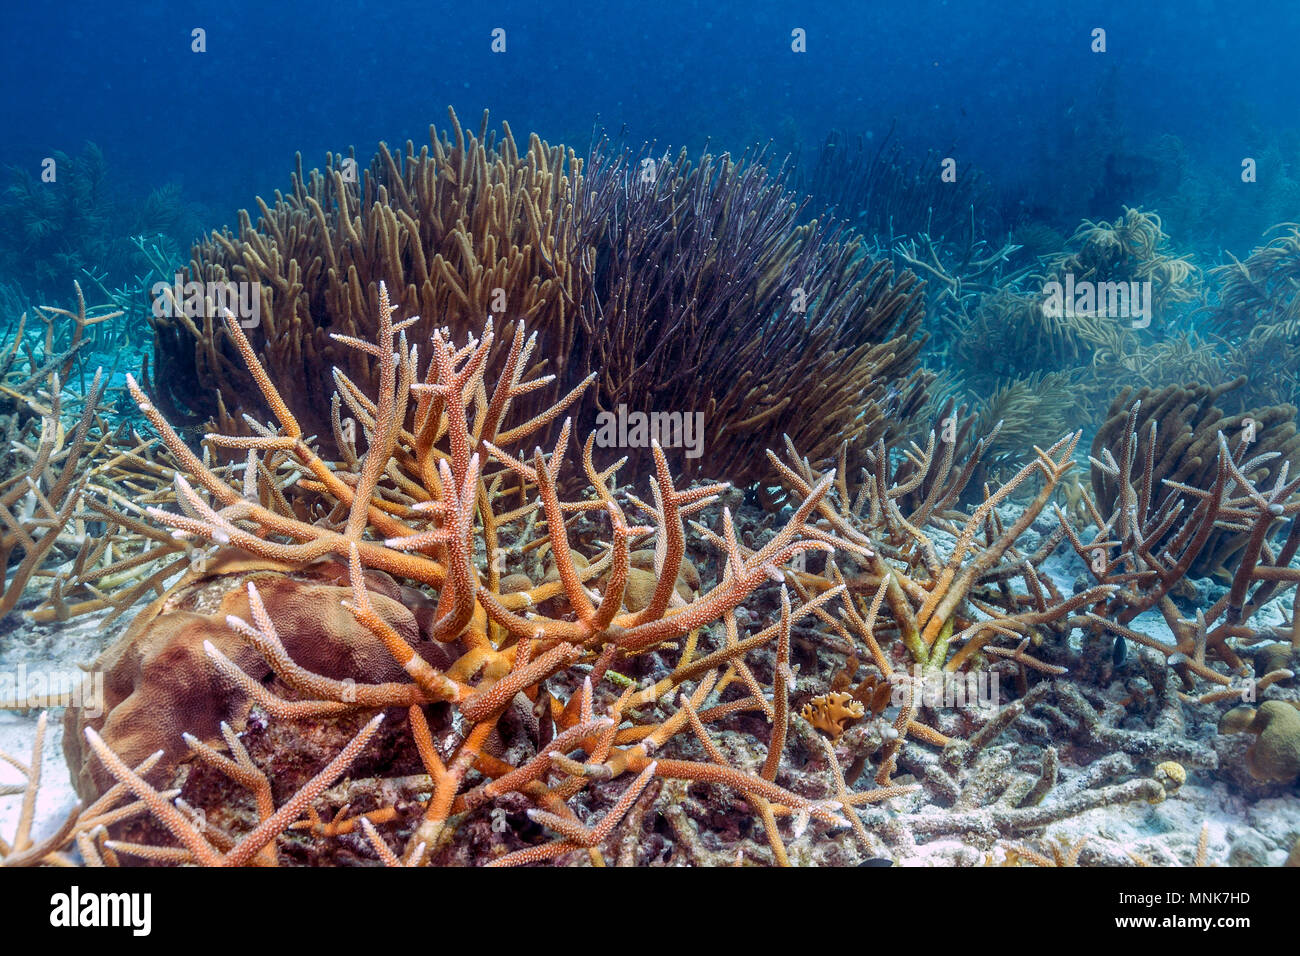 Coral reef in Carbiiean Sea off coast of Bonaire staghorn coral,Acropora cervicornis Stock Photo